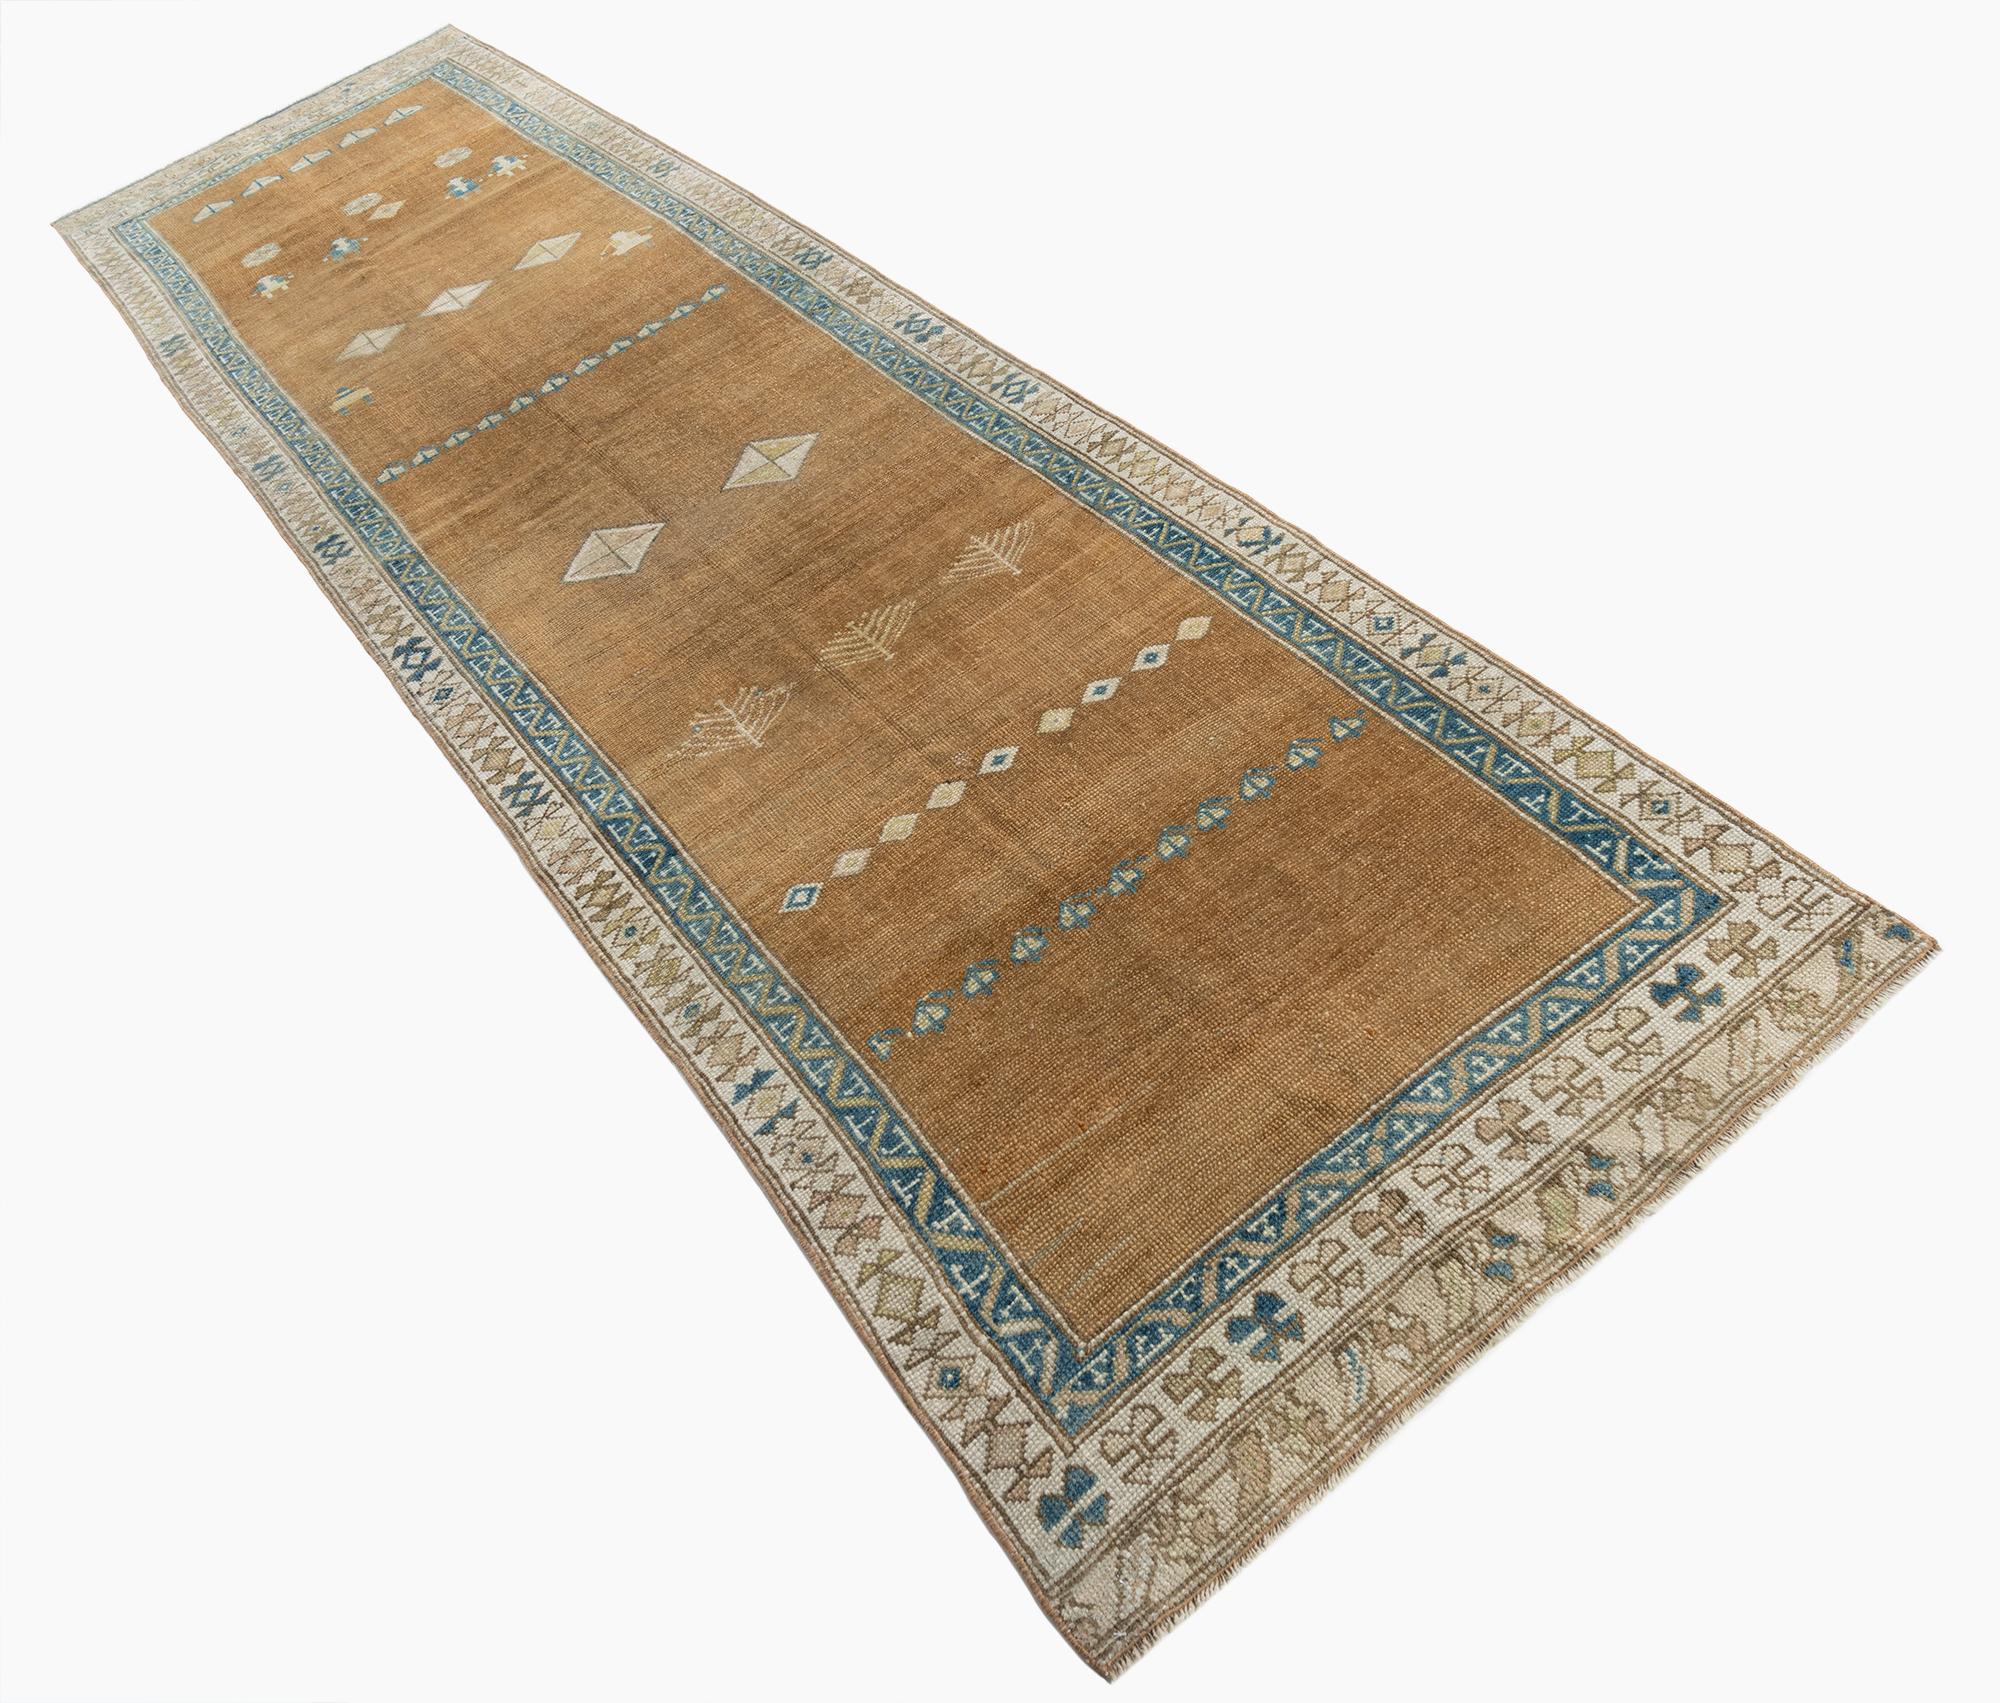 Antique Persian Hamadan Pictorial Runner 3' X 11'. A wonderful pictorial runner. Hamadan town in western Iran is the ancient Persian city of Ecbatana. Around the town are located hundreds of mostly Kurdish villages weaving an incredible variety of